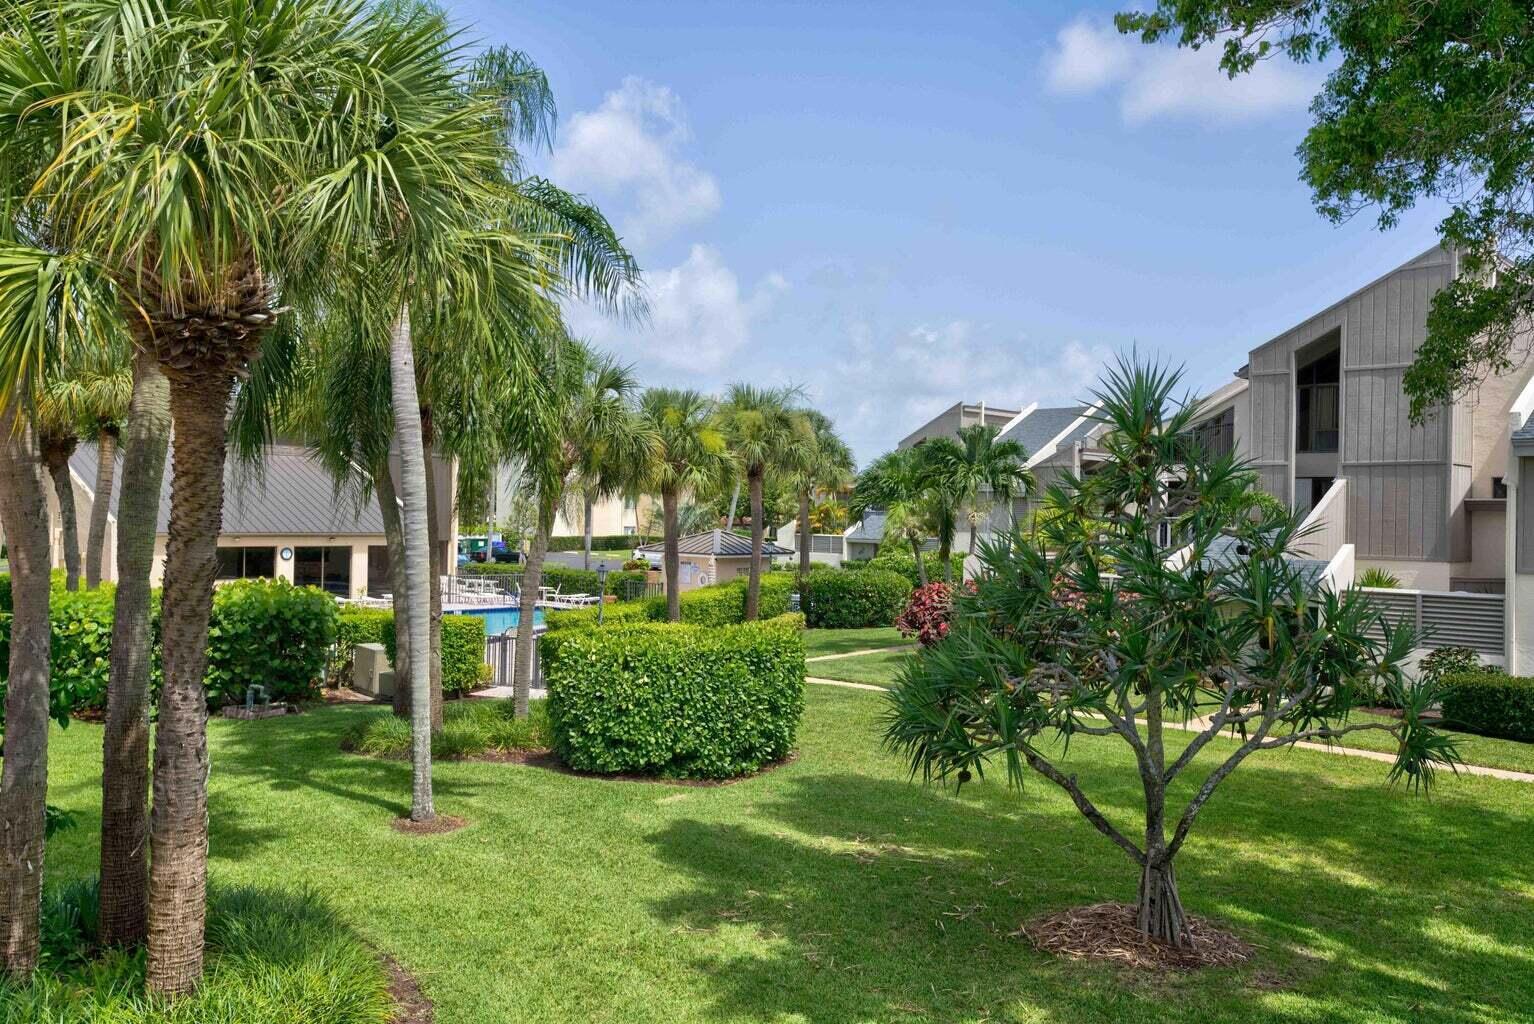 Whether you are looking for the Summer only or for an Annual stay, this 2-beds 2-baths condo has so much to offer! The extra large balcony is PERFECT for al fresco dining and stargazing while enjoying the peace and serenity of the lush garden and the pool area. Situated only STEPS away from famous surfing and kite surfing beaches, in the heart of renowned Jupiter, the interior of this condo offers volume ceilings and a comfortable, open concept, loft-style layout. Surrounded by Nature Conservancy protected beaches and Parks, and steps away from glamorous Restaurants and island flavor Tiki Bars, this fully furnished condo by the beach is available on April 1st.